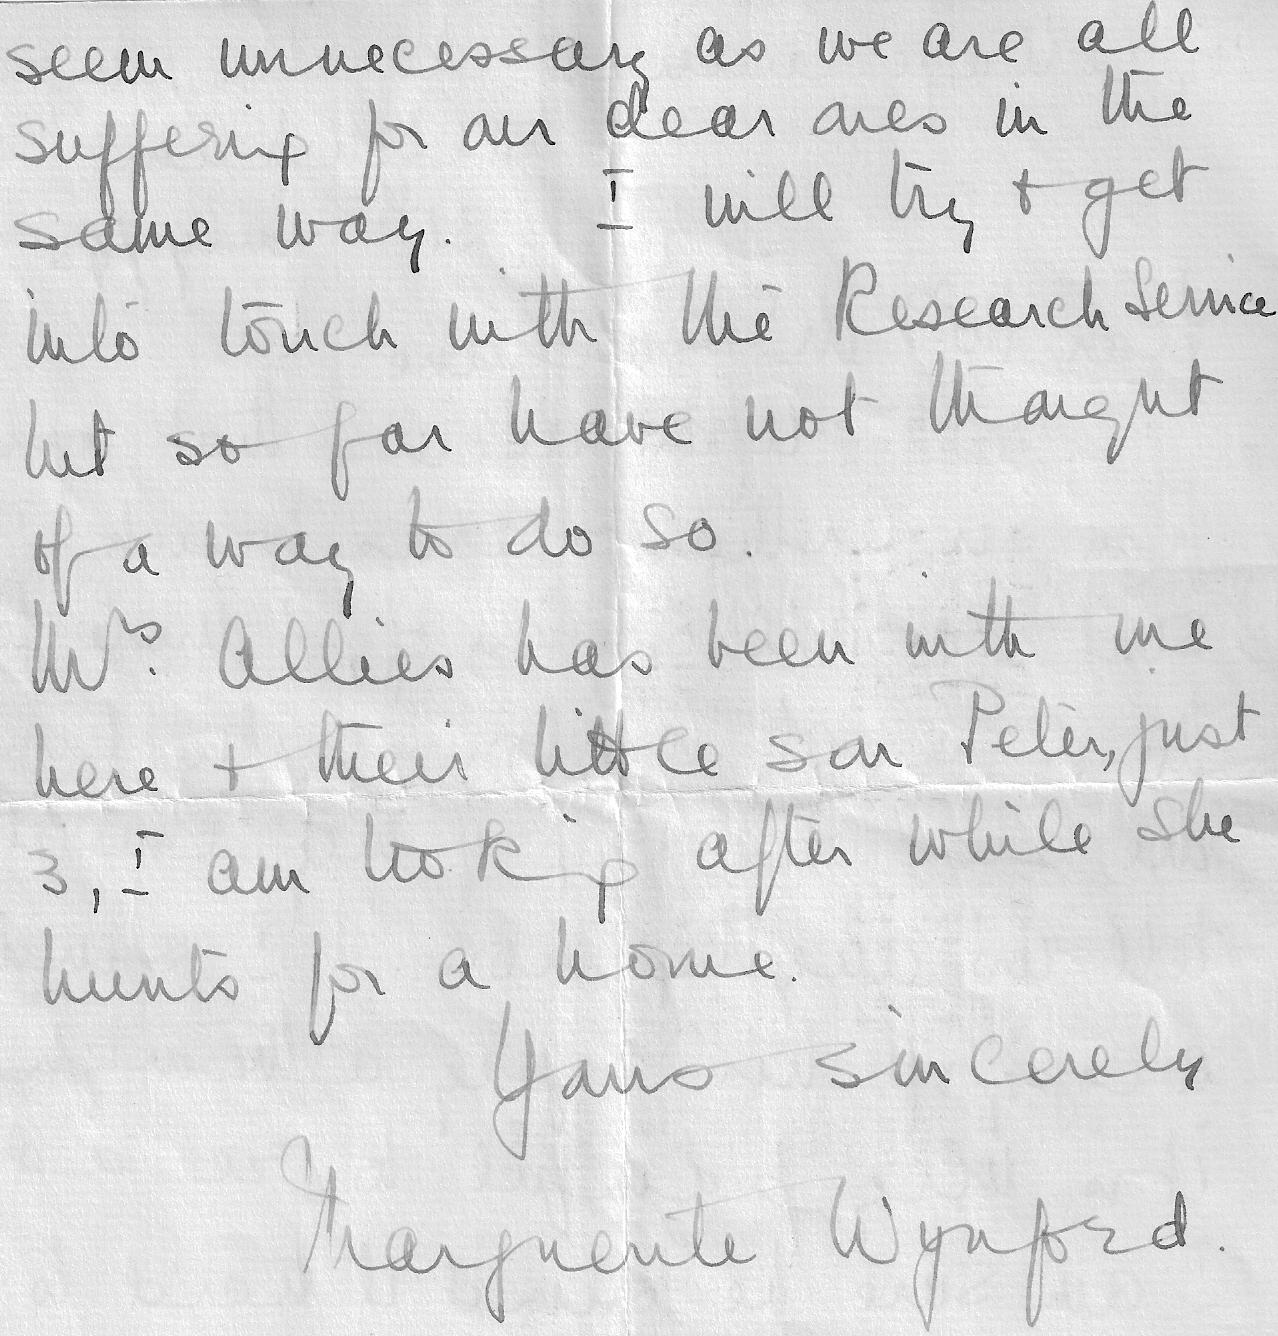 McFarlane_James_Letter_from_Lady_Wynford_to_Mr_plus_Mr_McFarlane_Page_2.